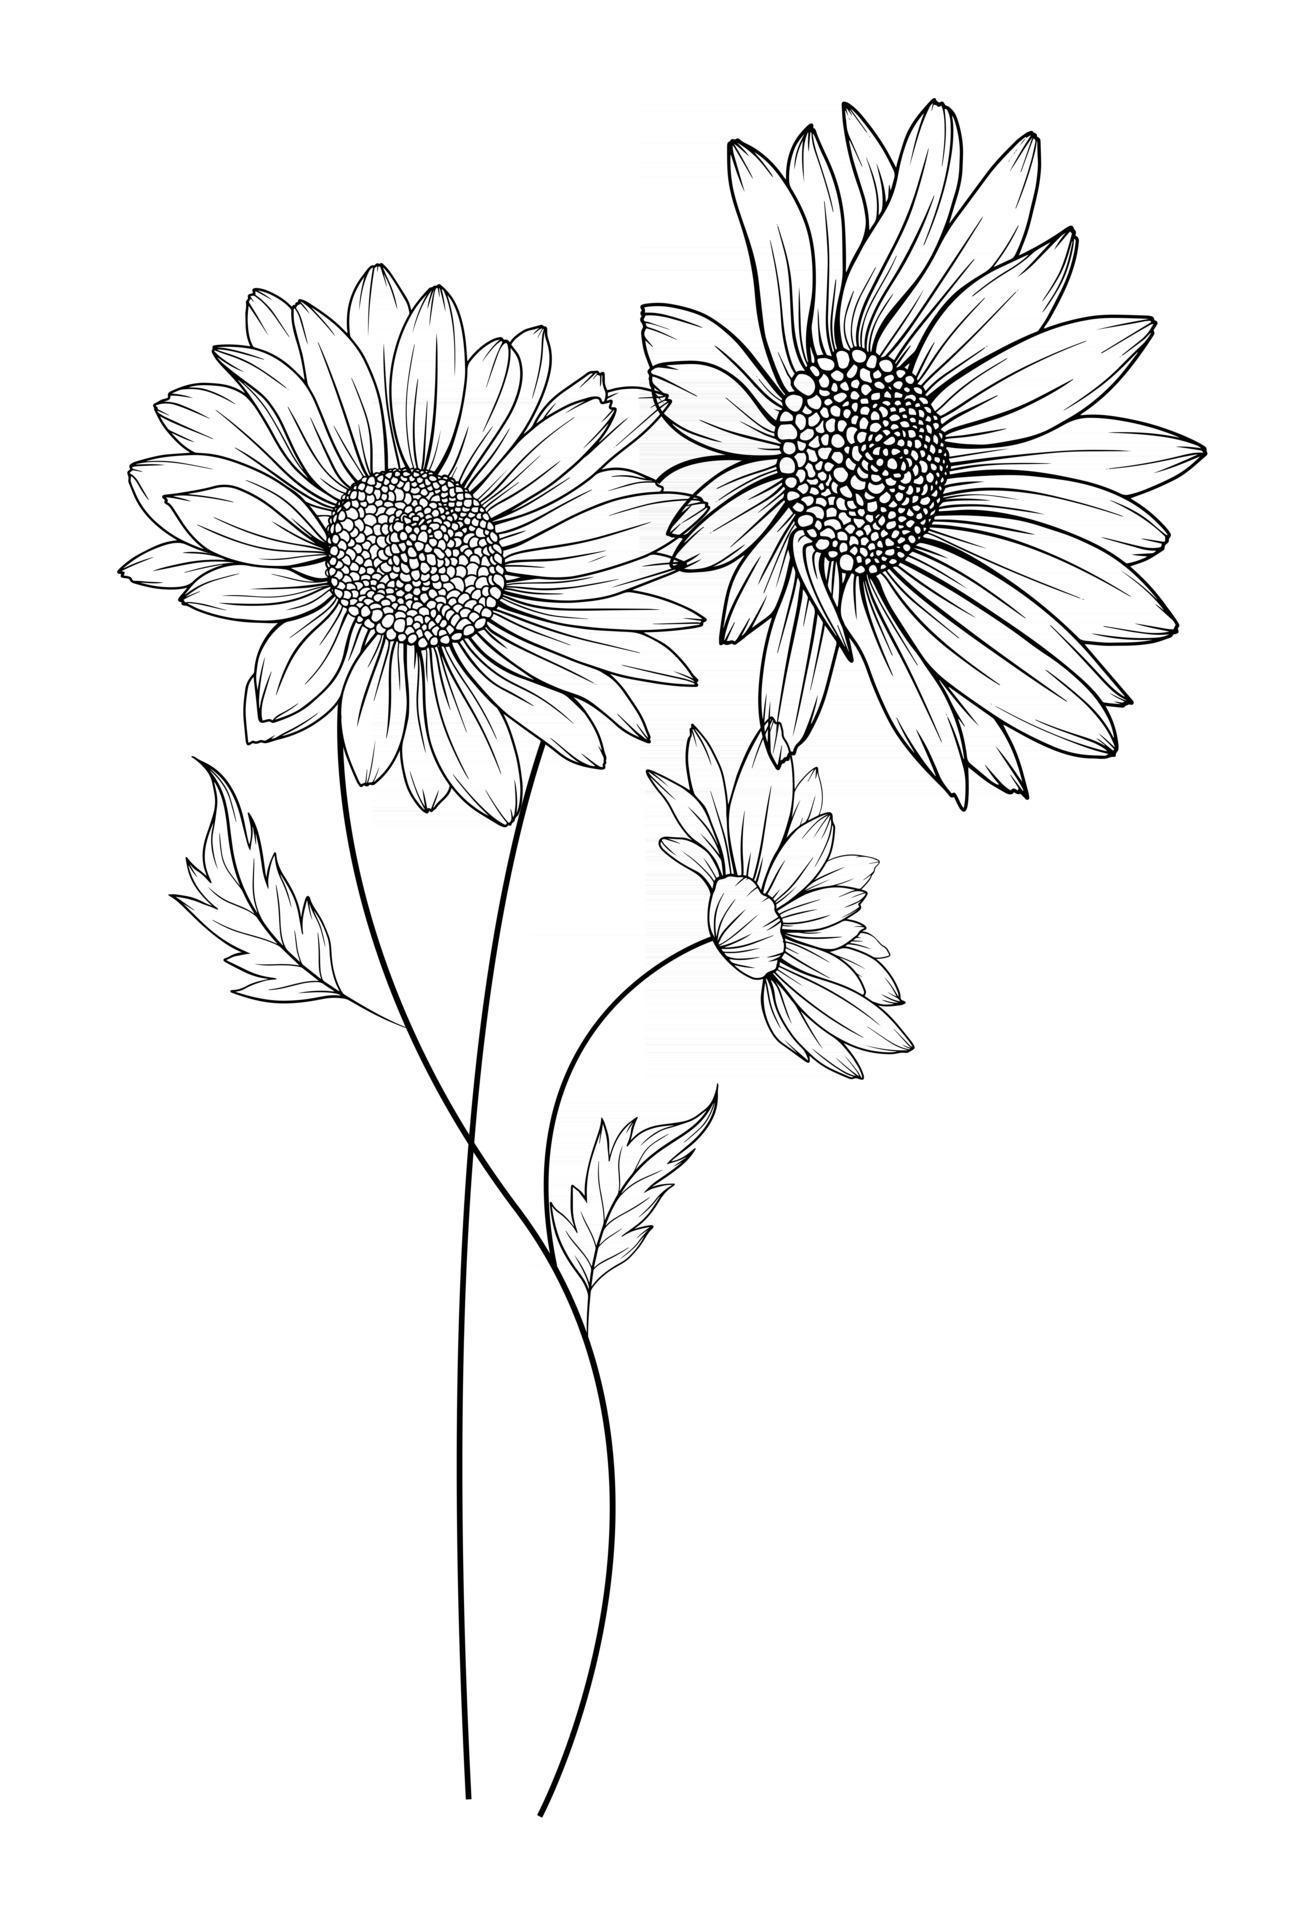 Daisy Flower Outline Daisy LIne Art Line Drawing chamomile outline